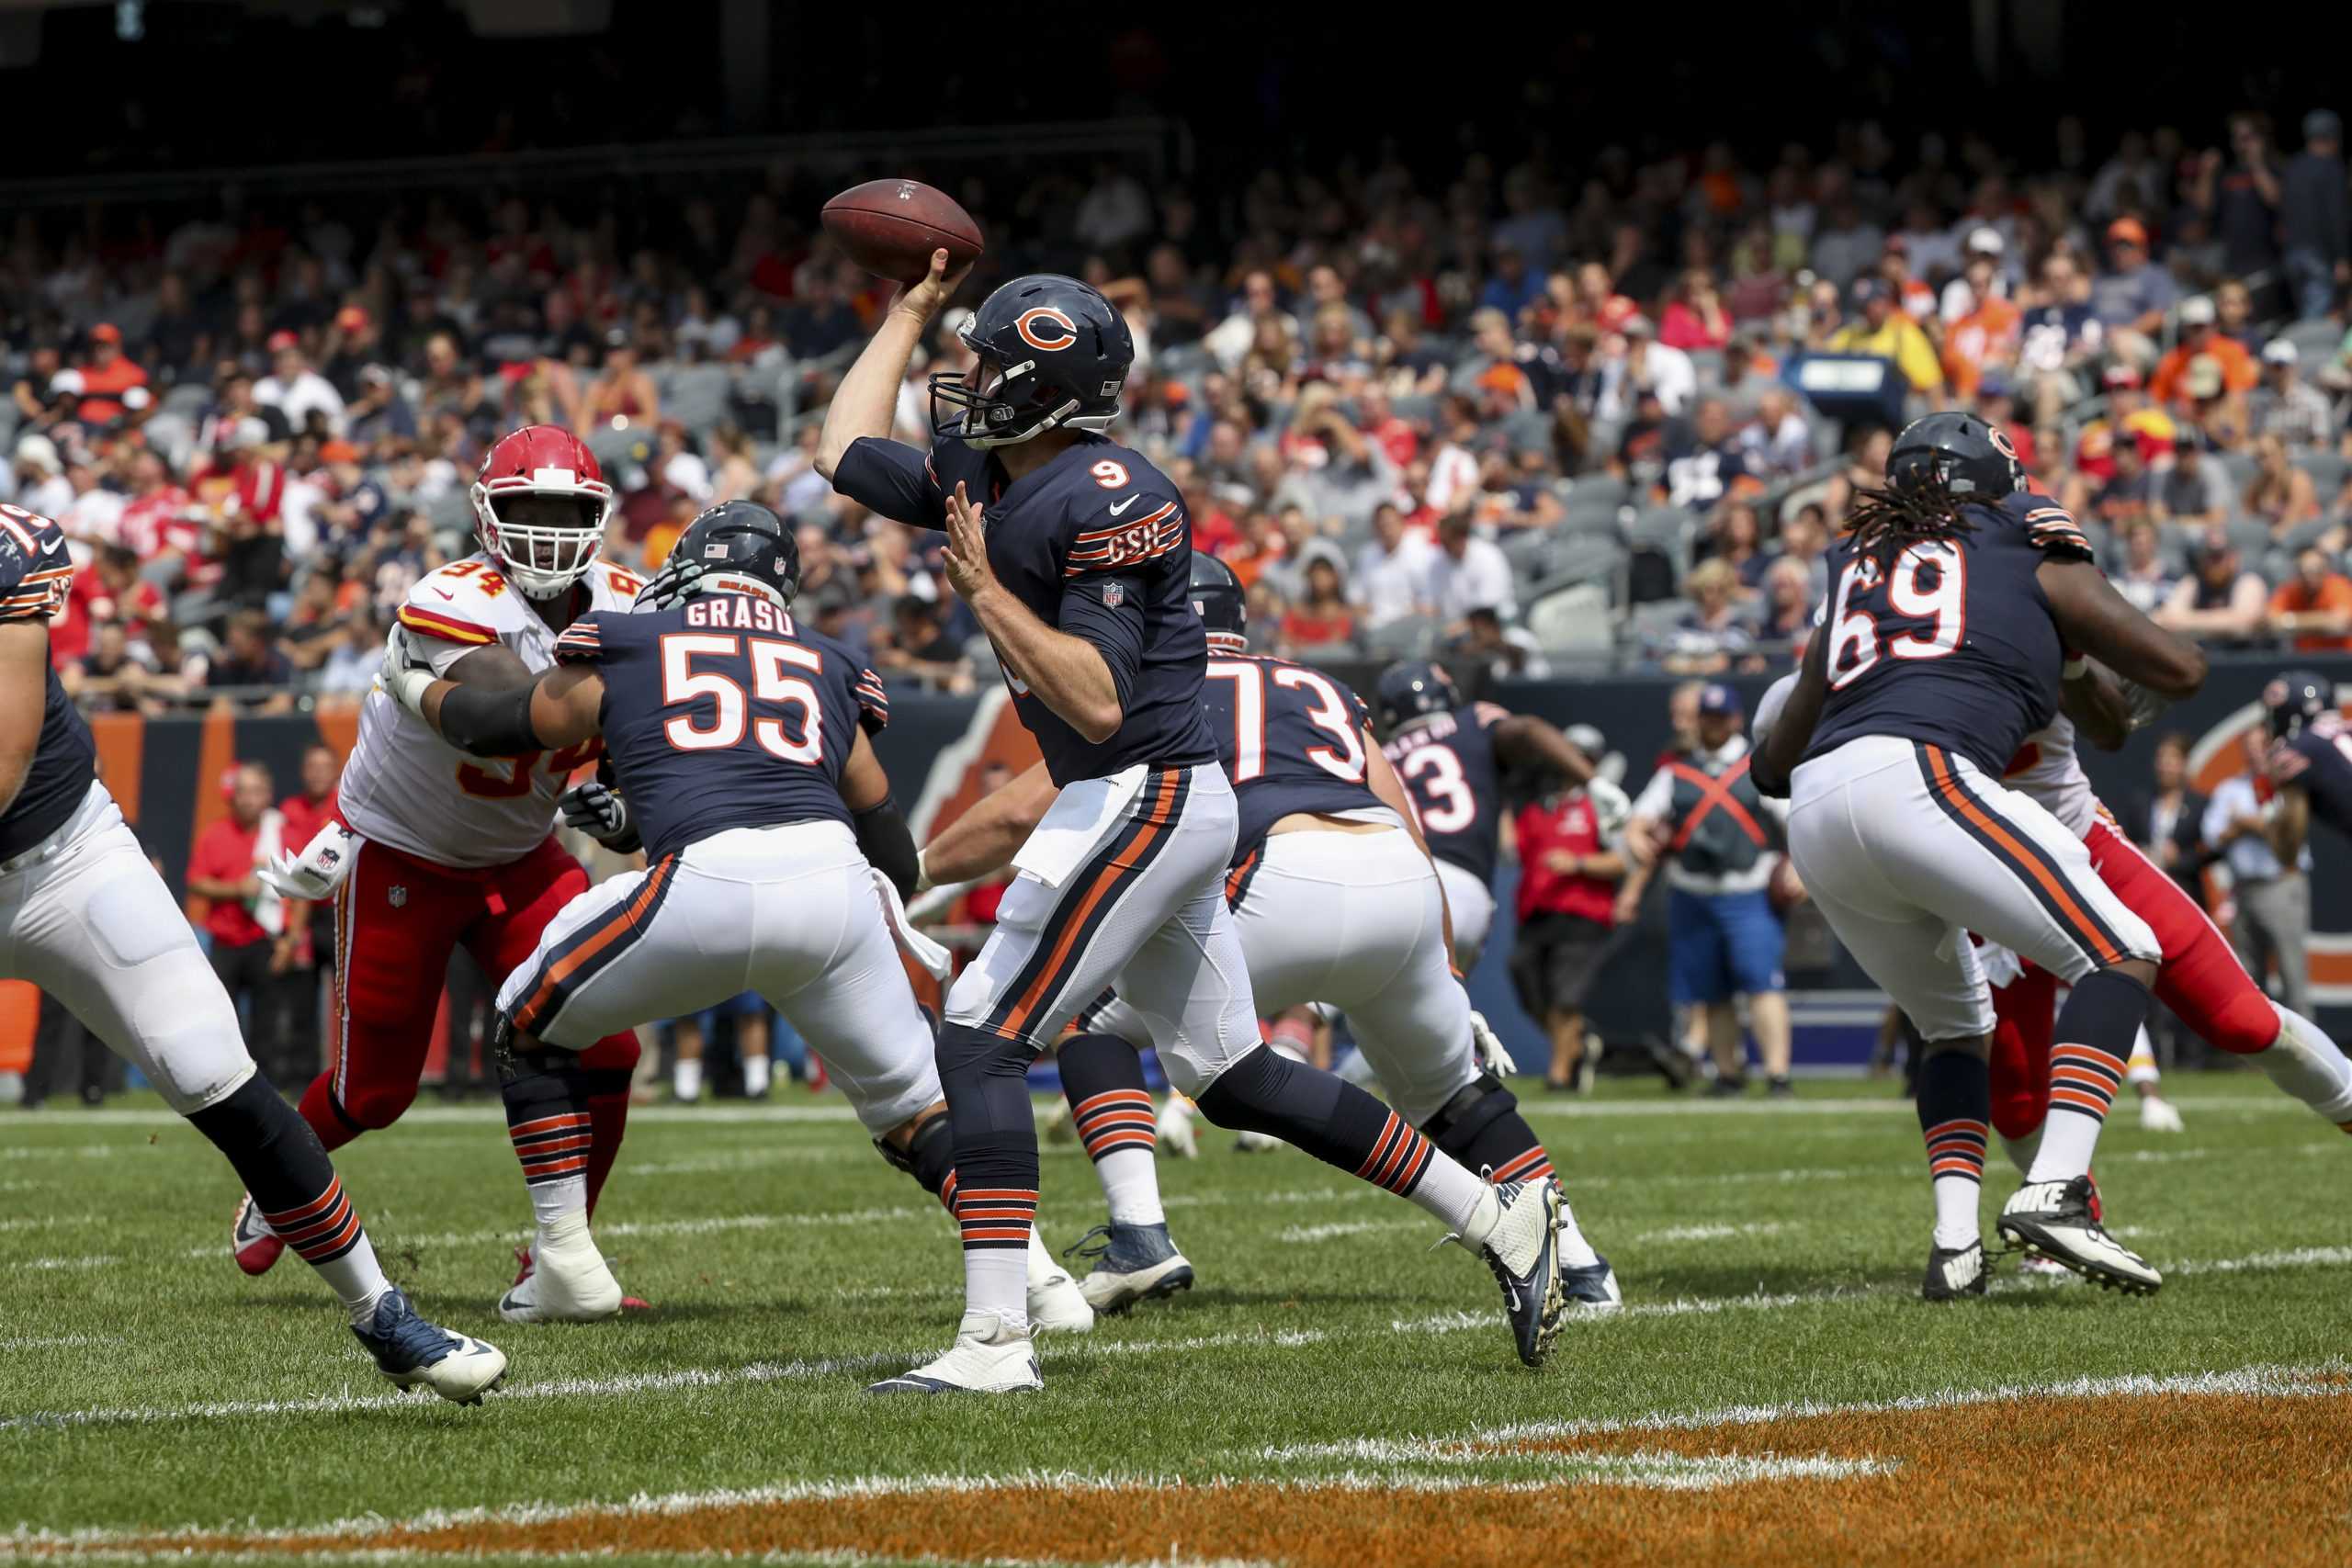 Chicago Bears quarterback Tyler Bray (9) throws a pass during the second half against the Kansas City Chiefs in the third preseason game of the season on Saturday, Aug. 25, 2018 at Soldier Field in Chicago, Ill. (Armando L. Sanchez/Chicago Tribune/TNS)